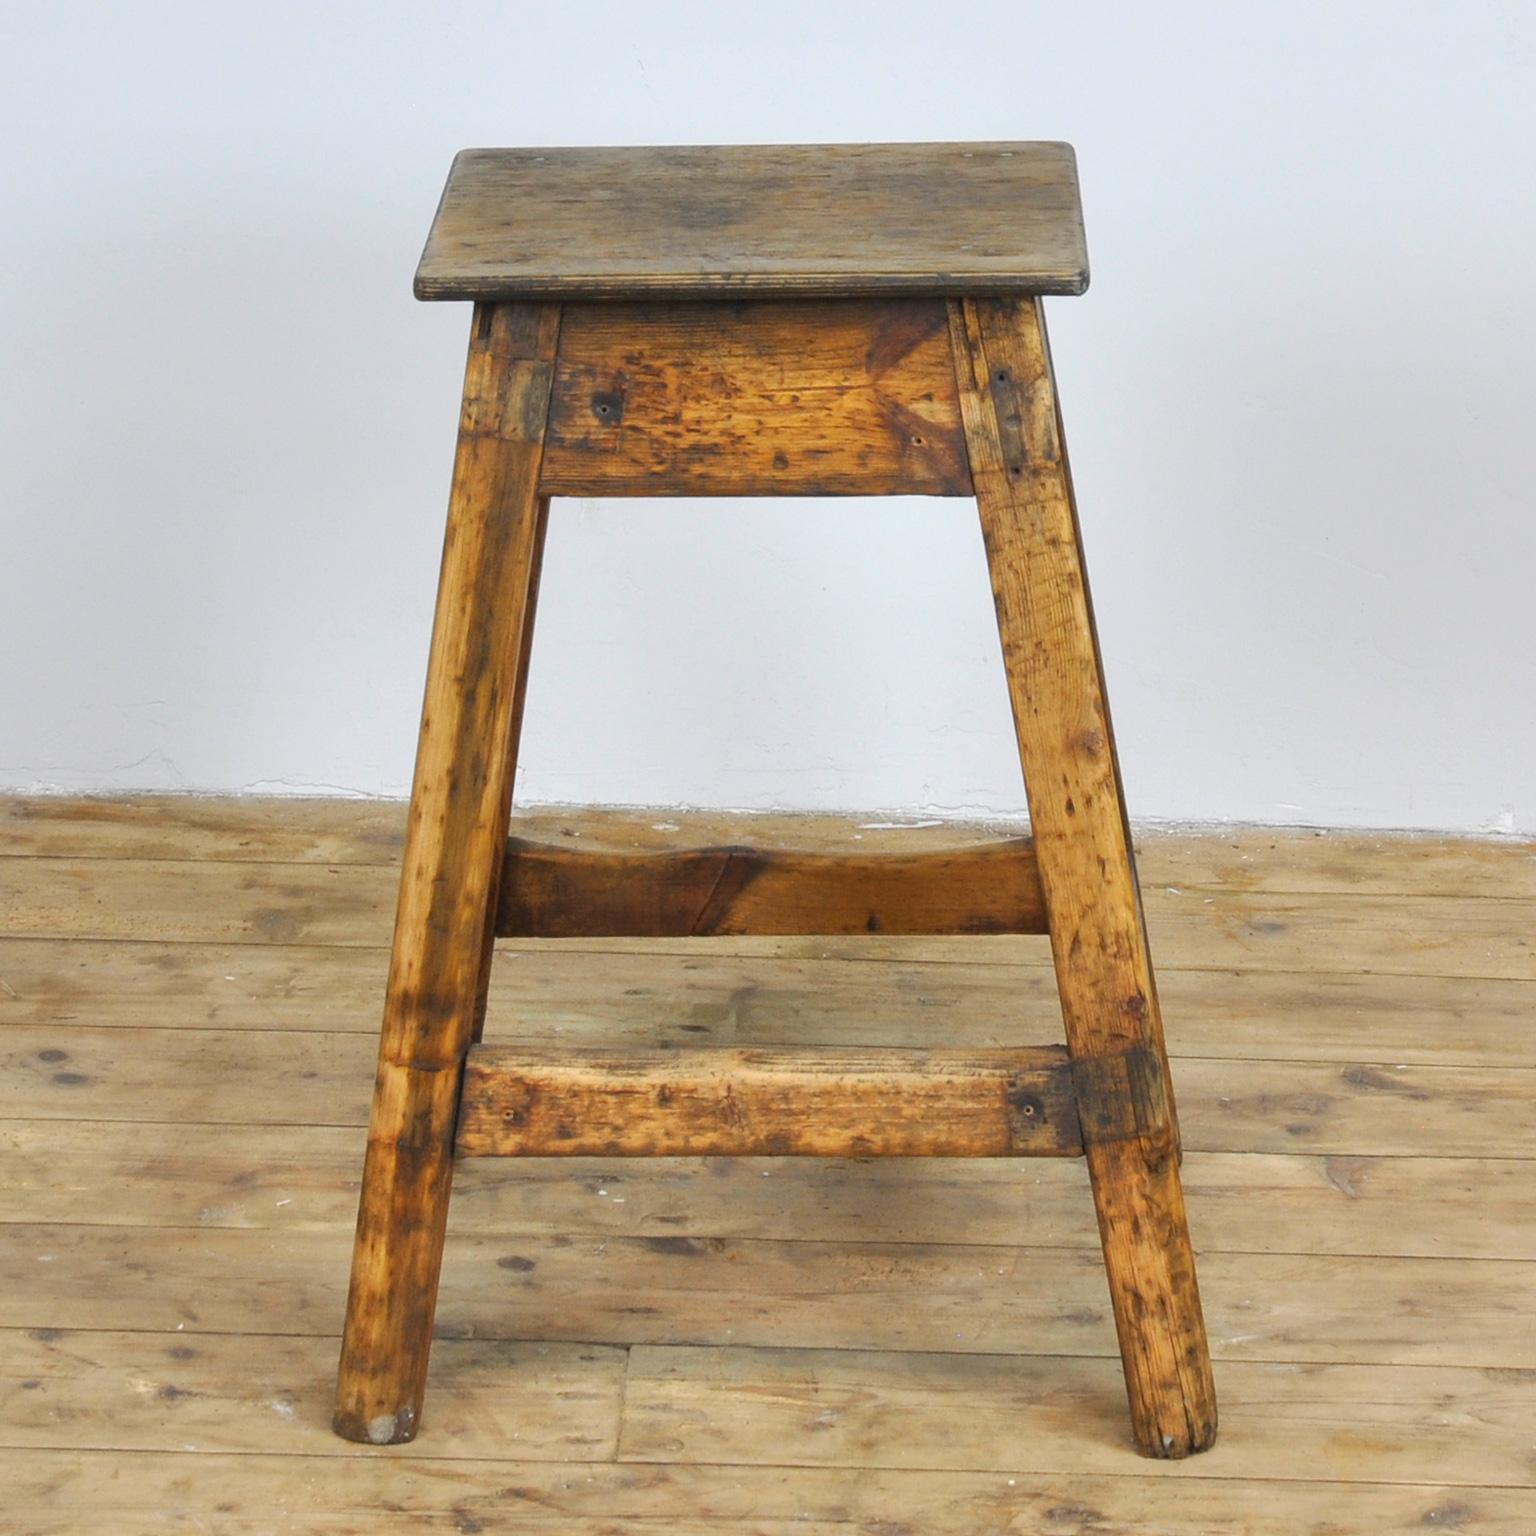 Rustic Wooden Stool, 1930s